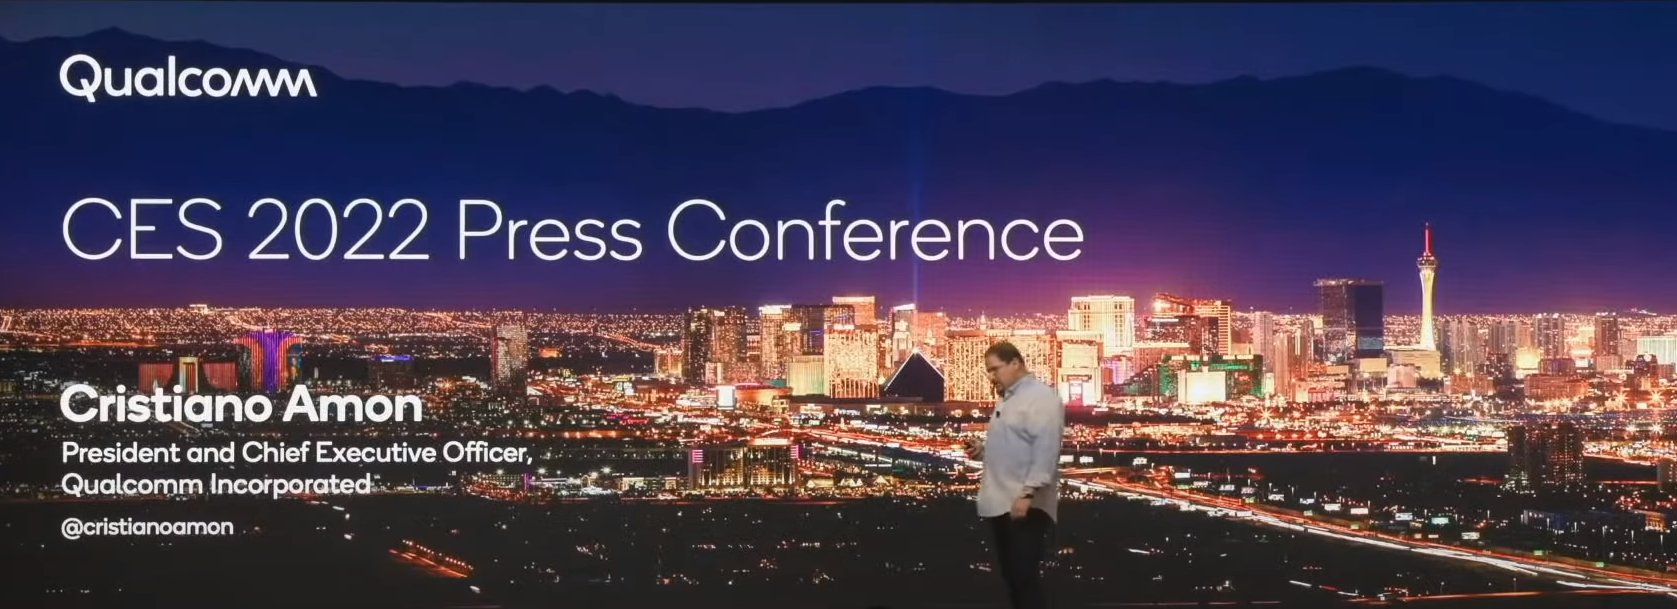 Qualcomm - Cristiano Amon主题演讲- Counterpoint Research CES 2022